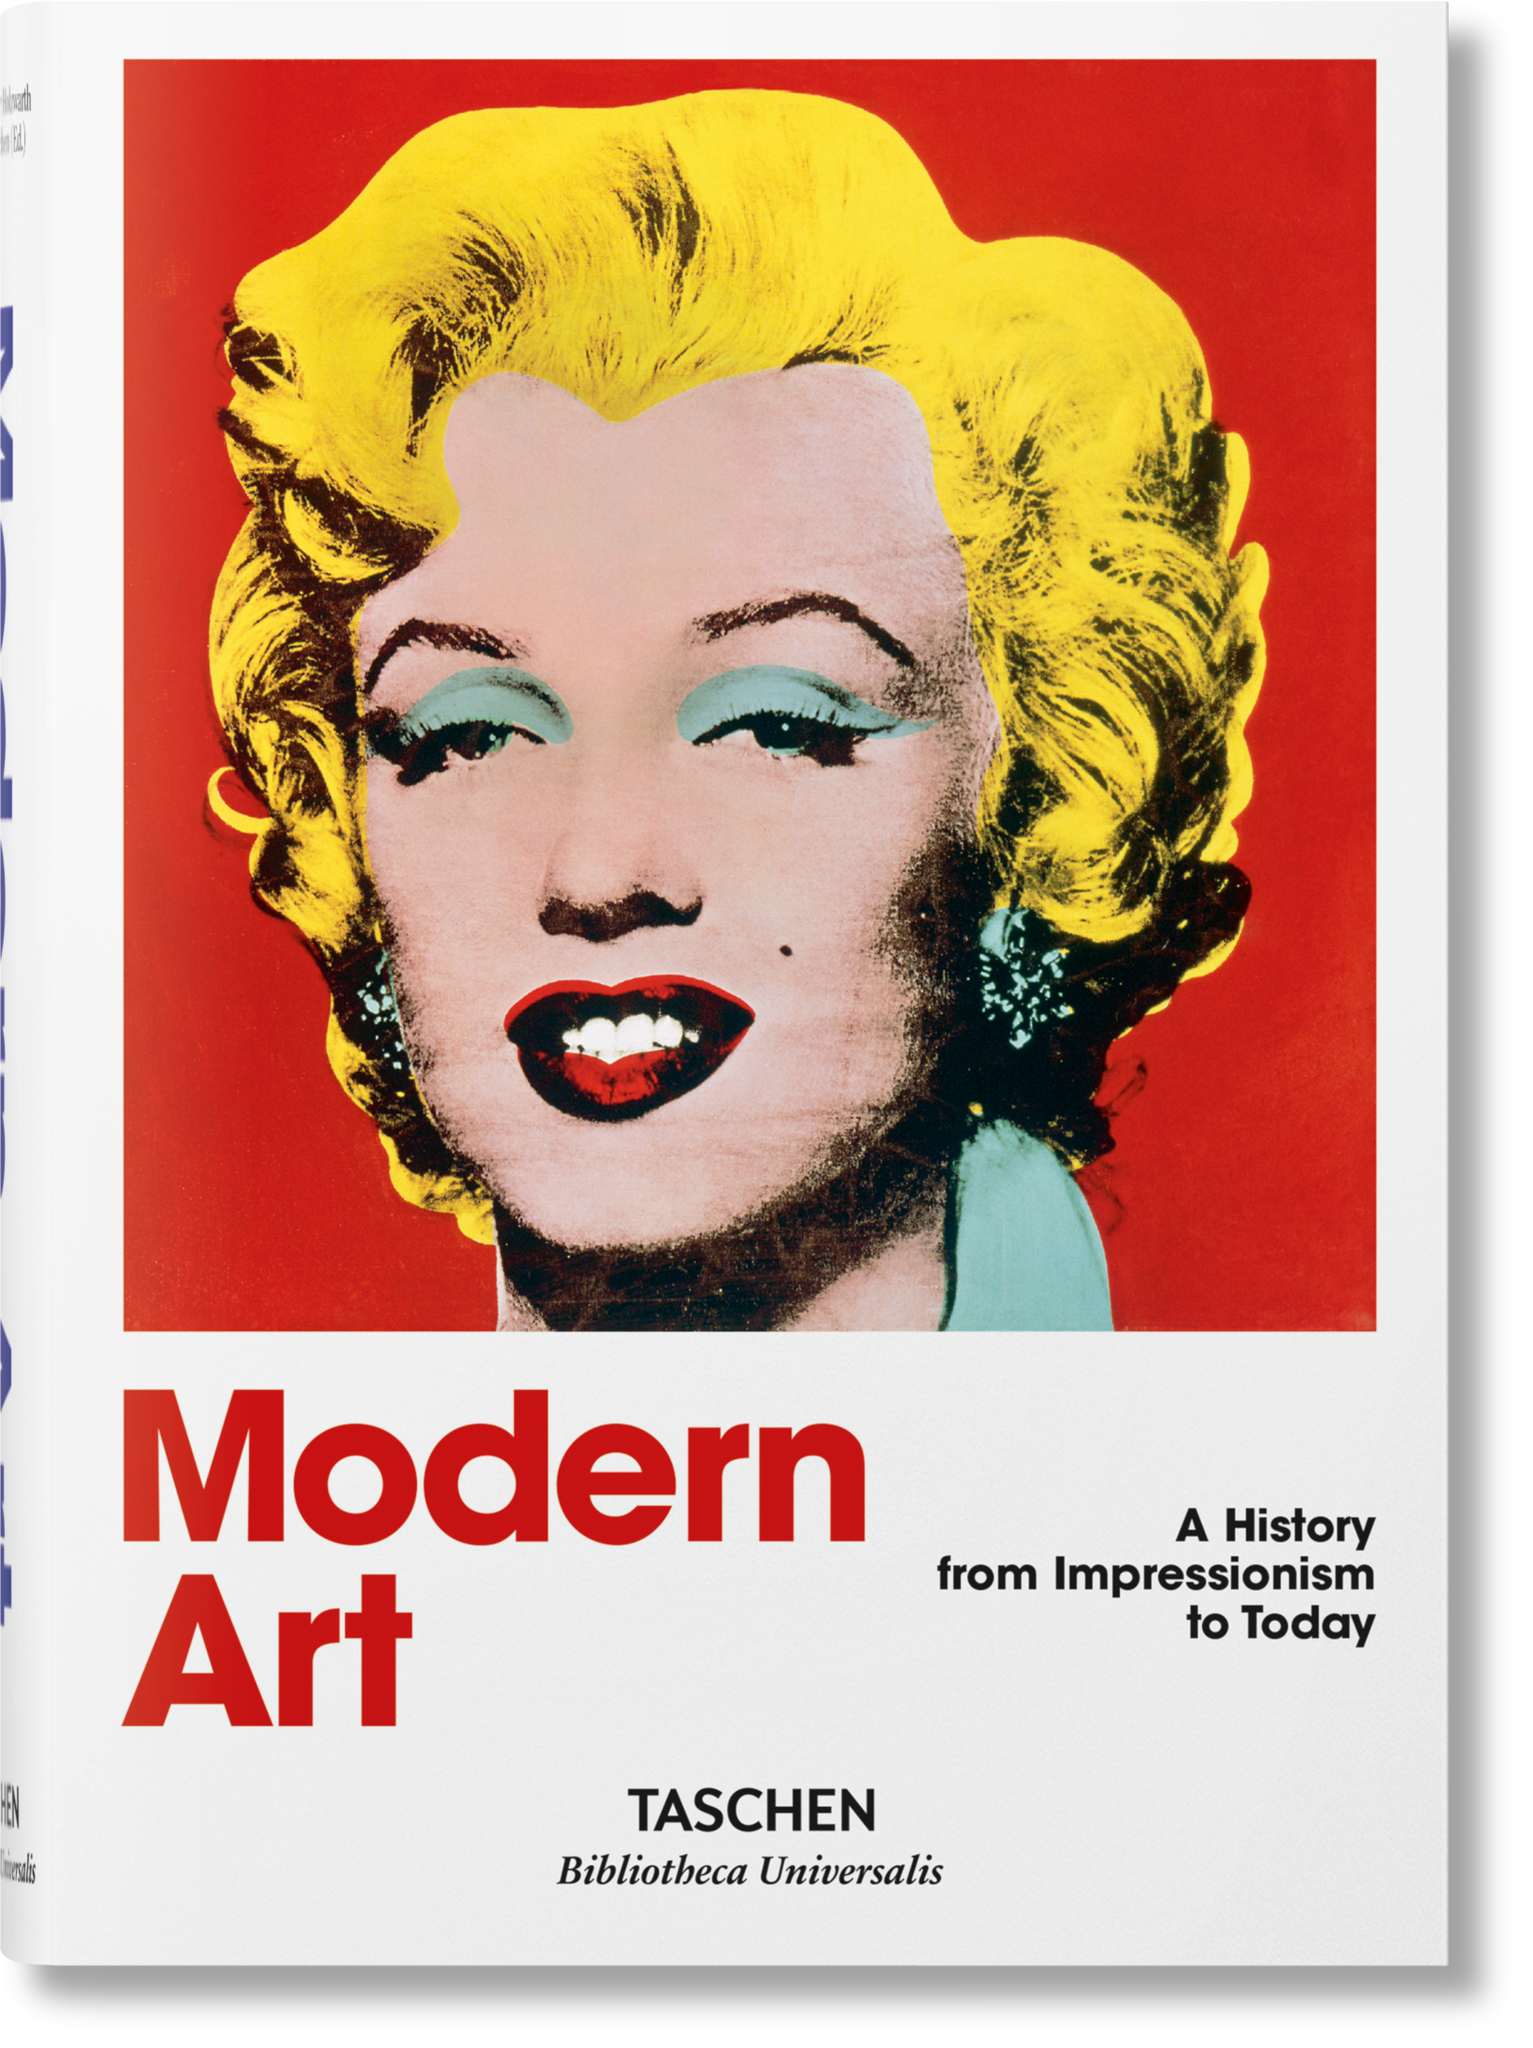 Modern Art - A History from Impressionism to Today - The Brant Foundation Shop